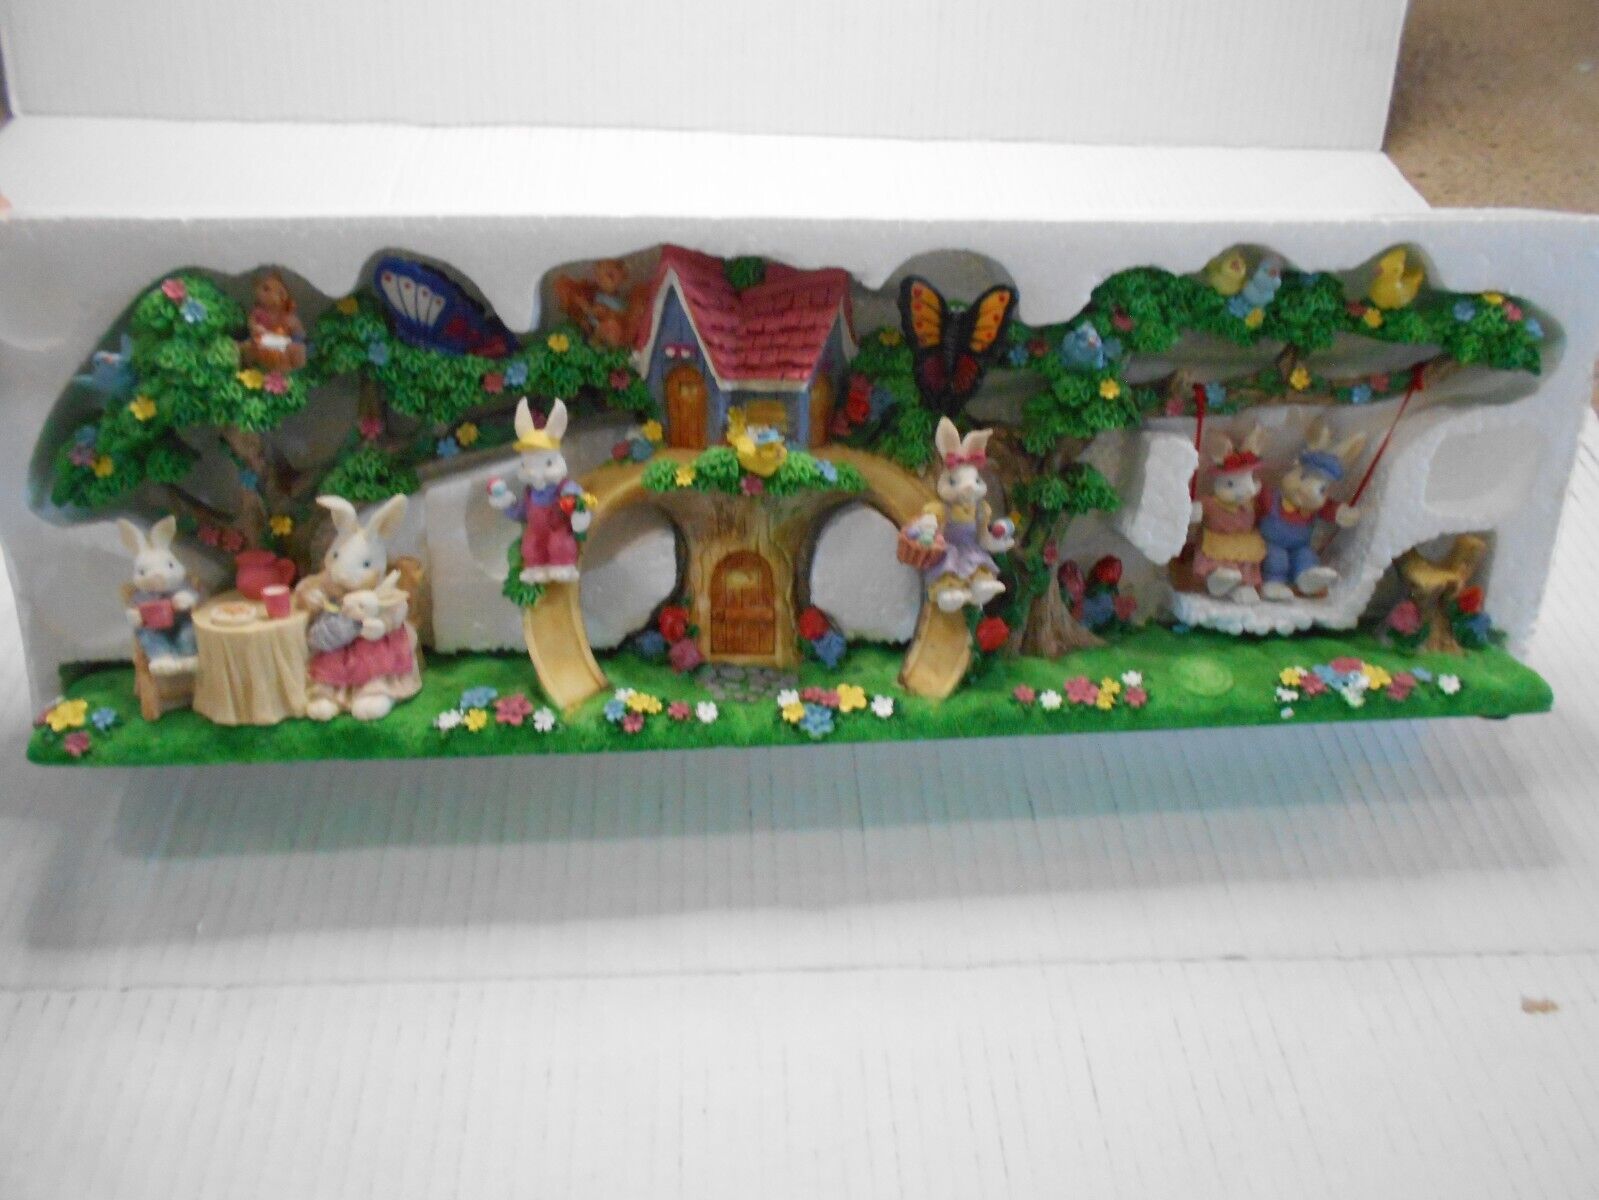 Easter Bunny Tree House By Easter Jubilee Spring Decor With Original Packaging